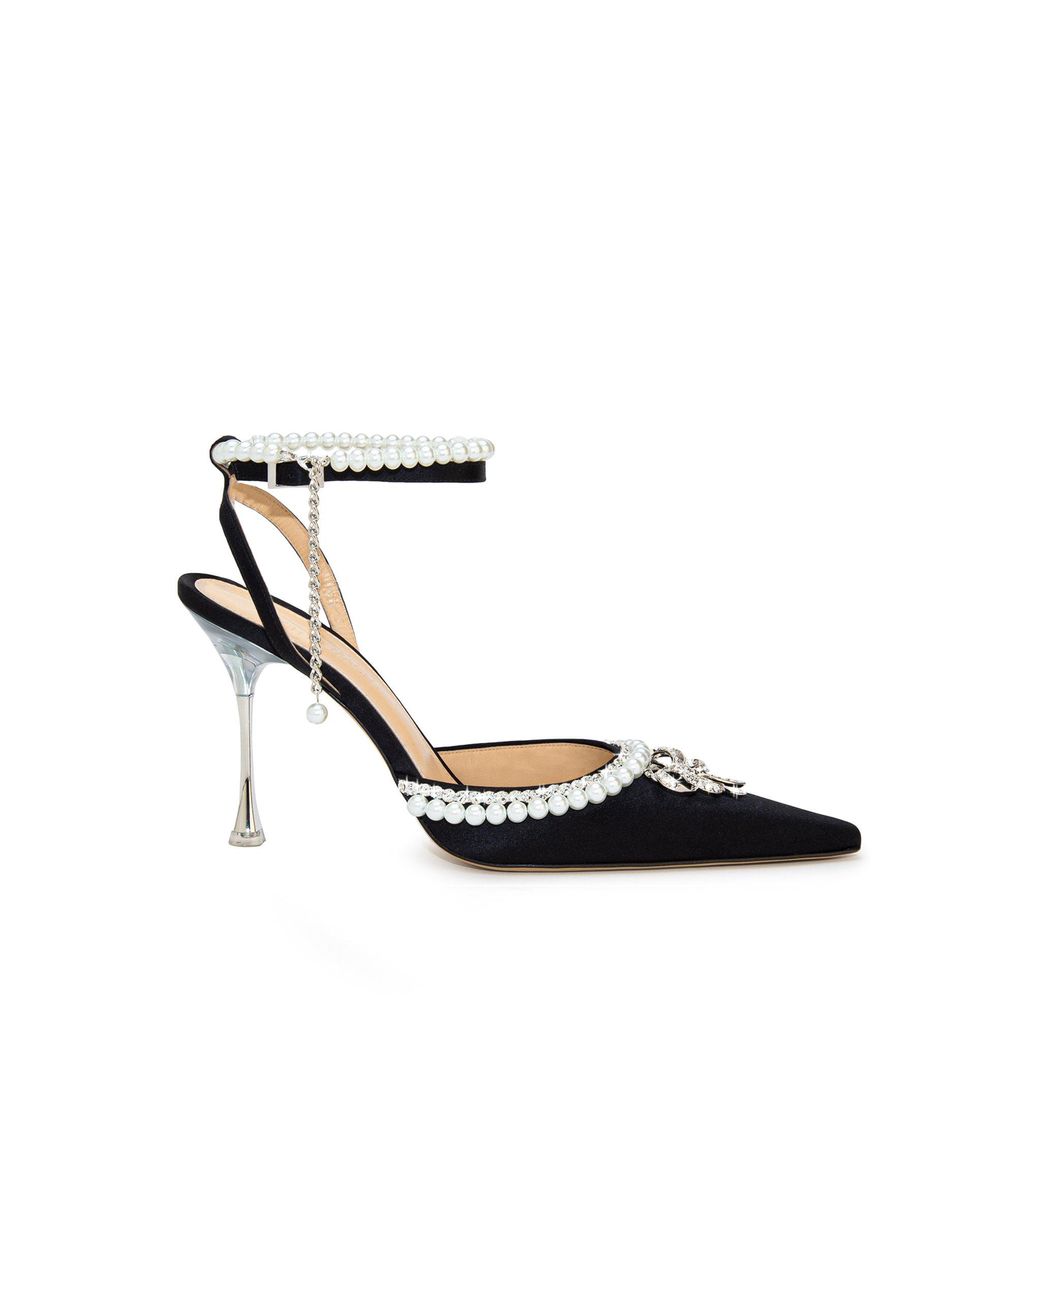 Mach & Mach Sophie Bow & Pearl Embellished Satin Pumps in Black | Lyst ...